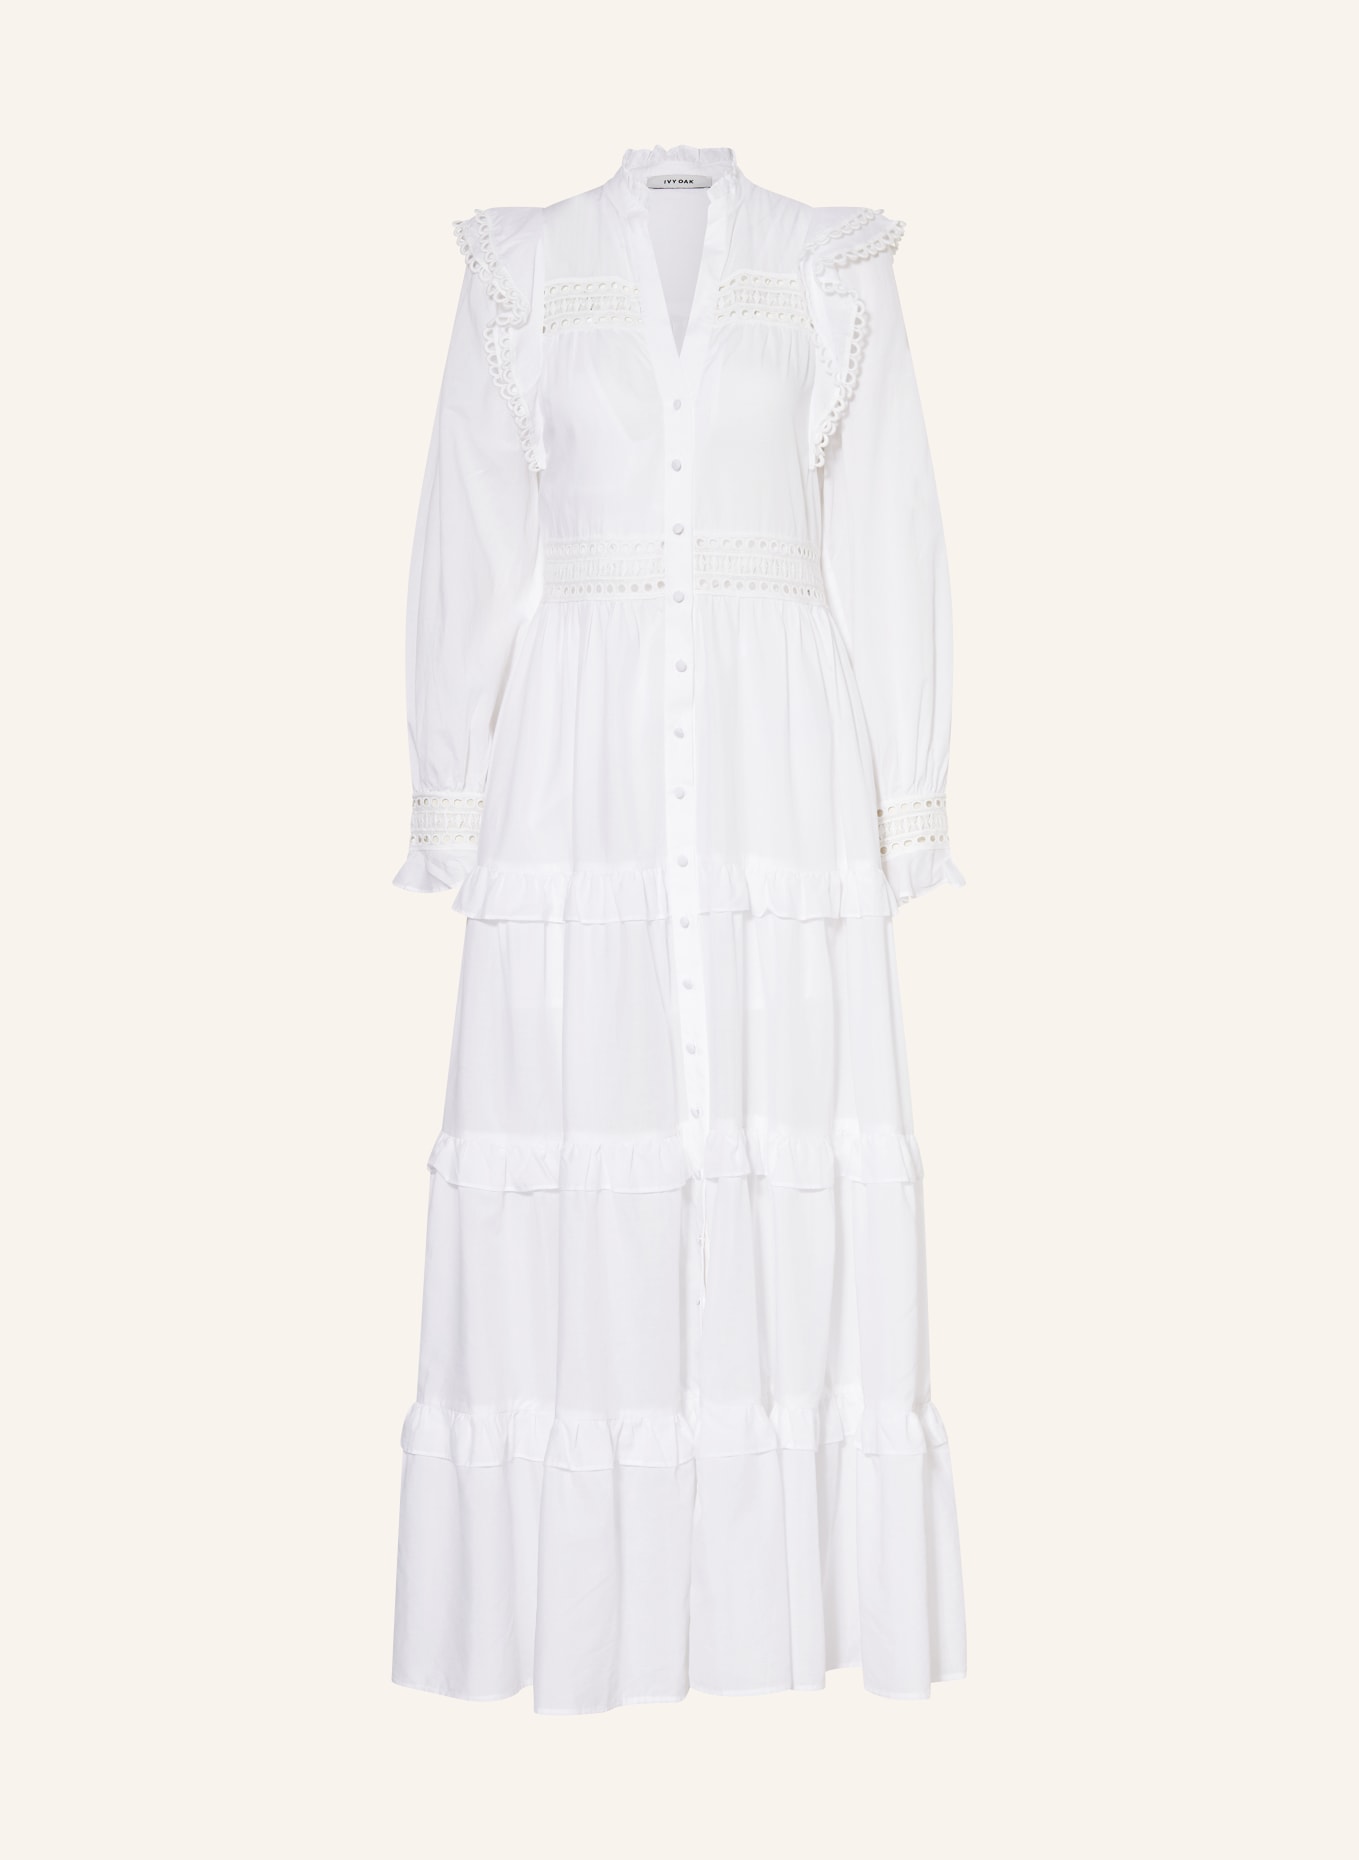 IVY OAK Shirt dress DENISA with broderie anglaise and ruffles, Color: WHITE (Image 1)